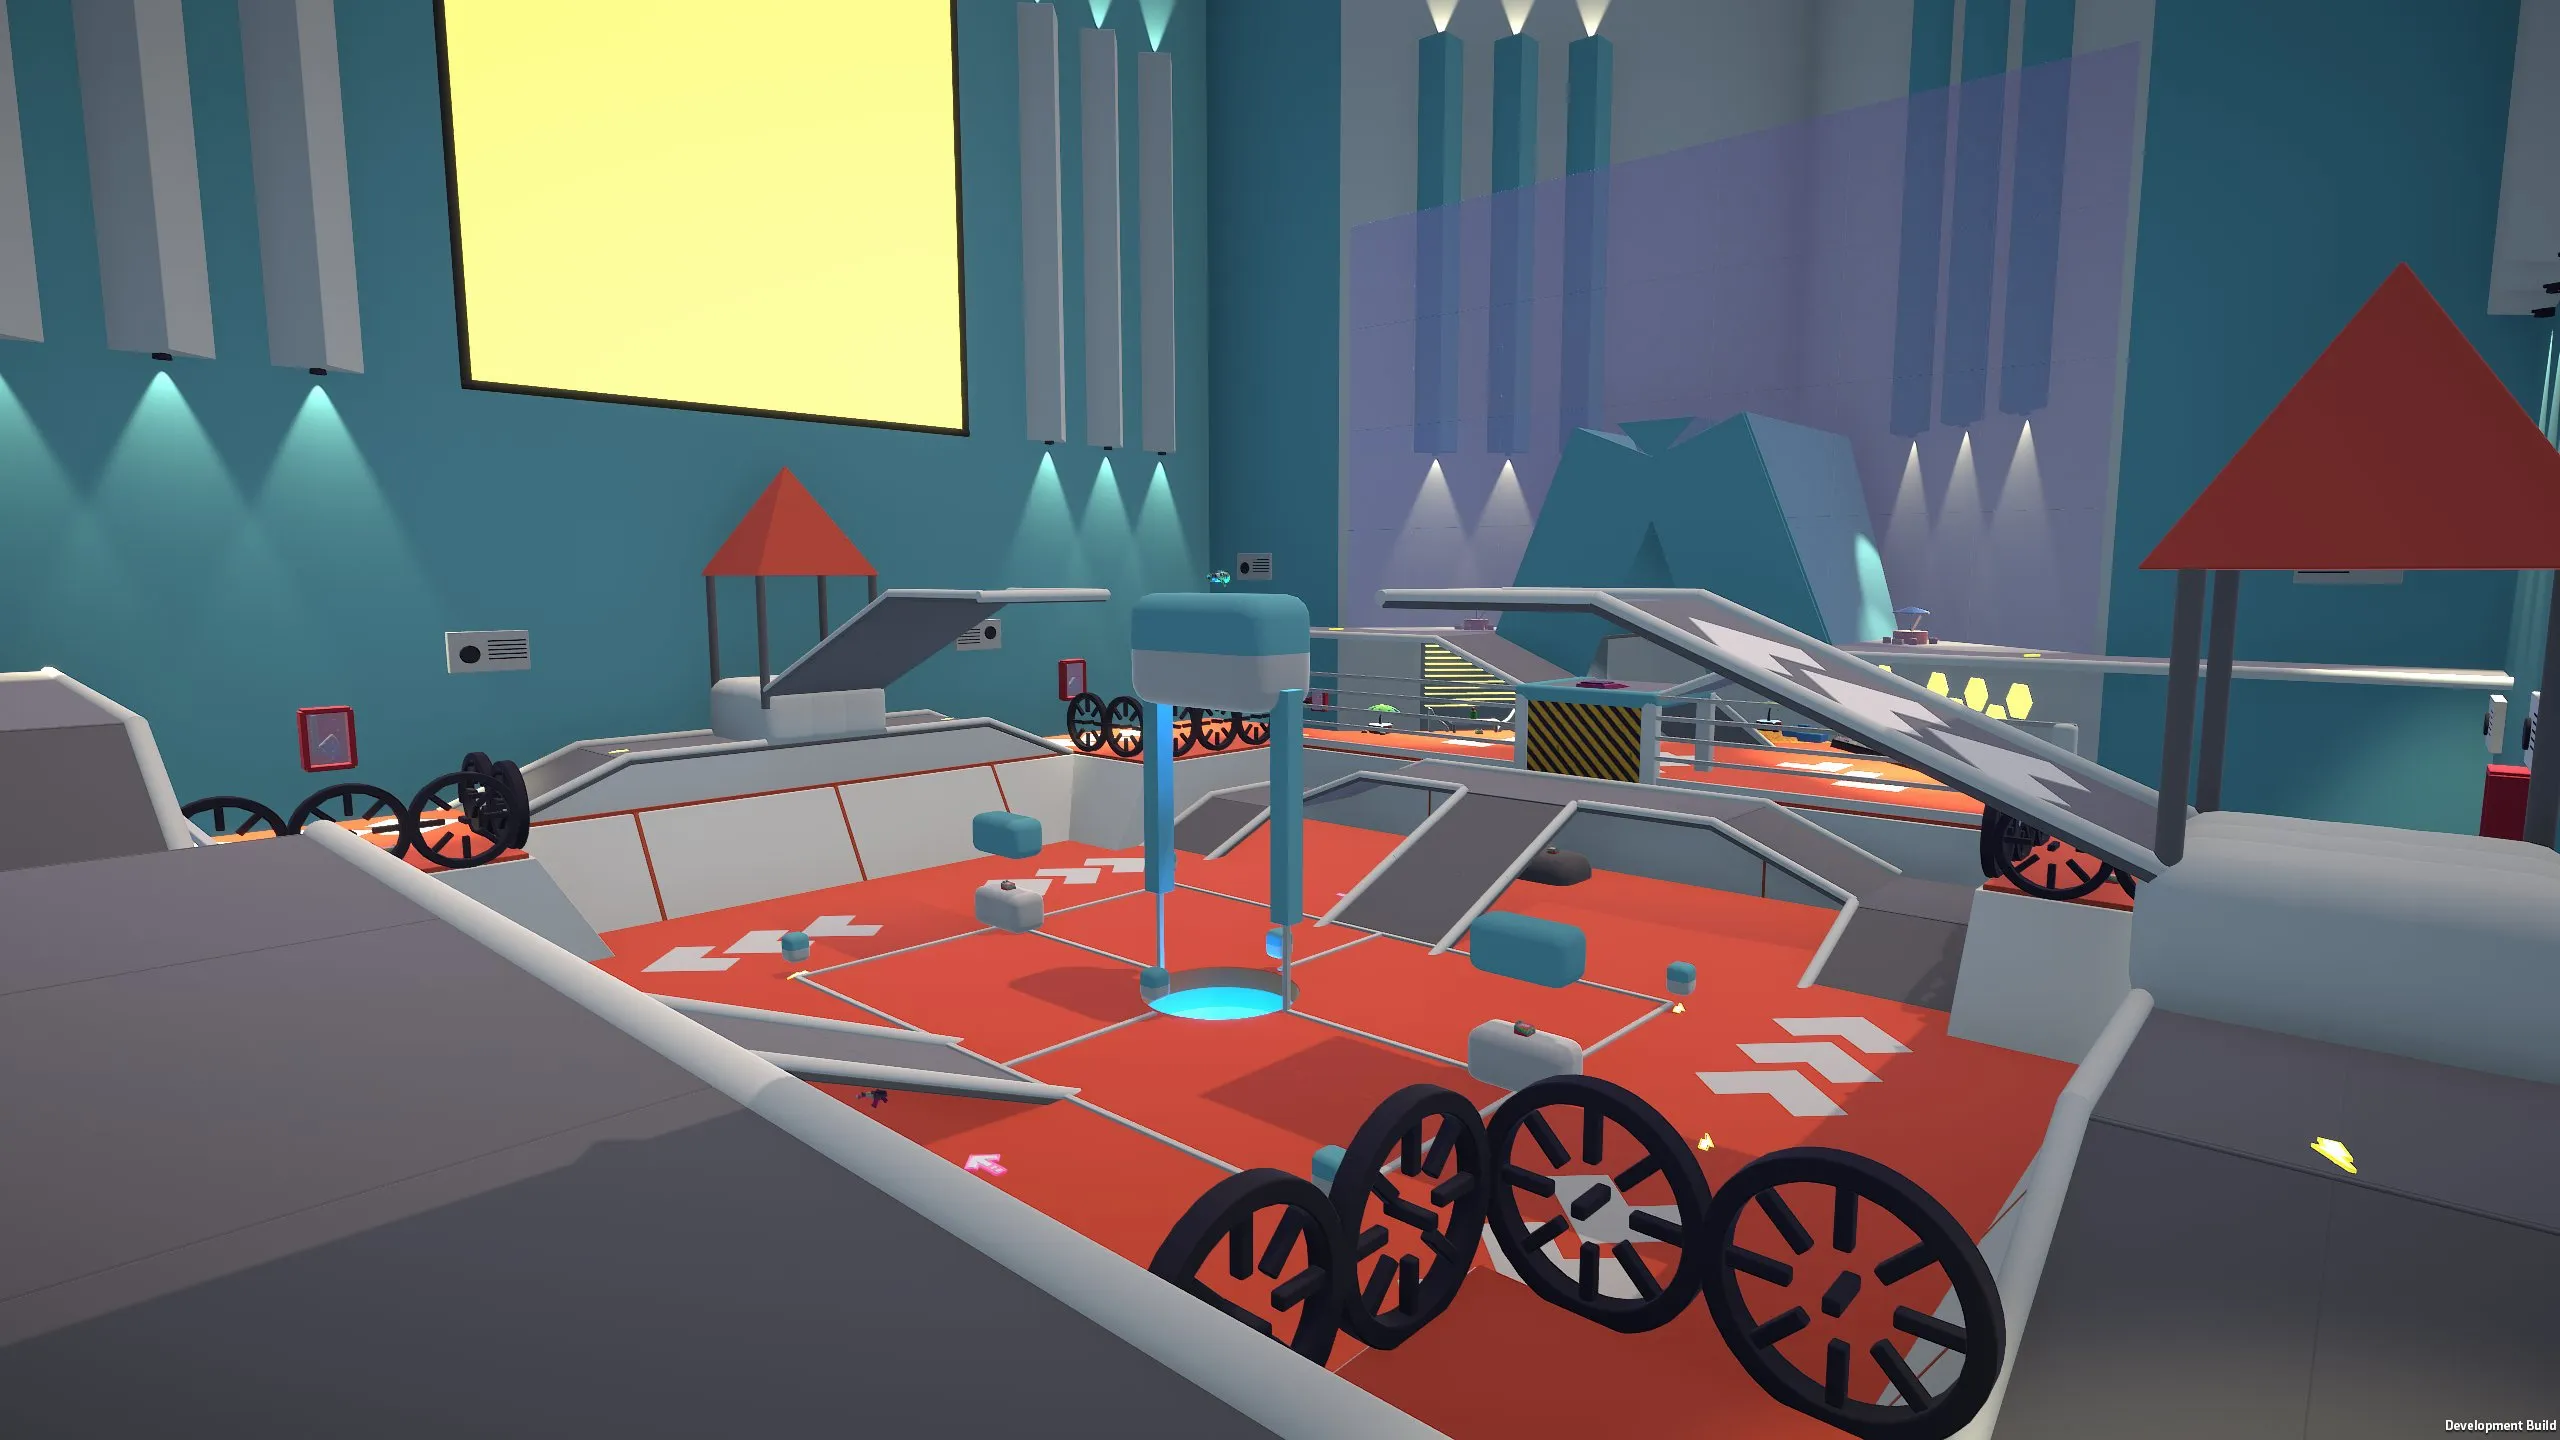 Racing track of Blankos Block Party. Racing is one of the game modes you can play in this game. Here, you can race with your friends using your Blankos NFT.